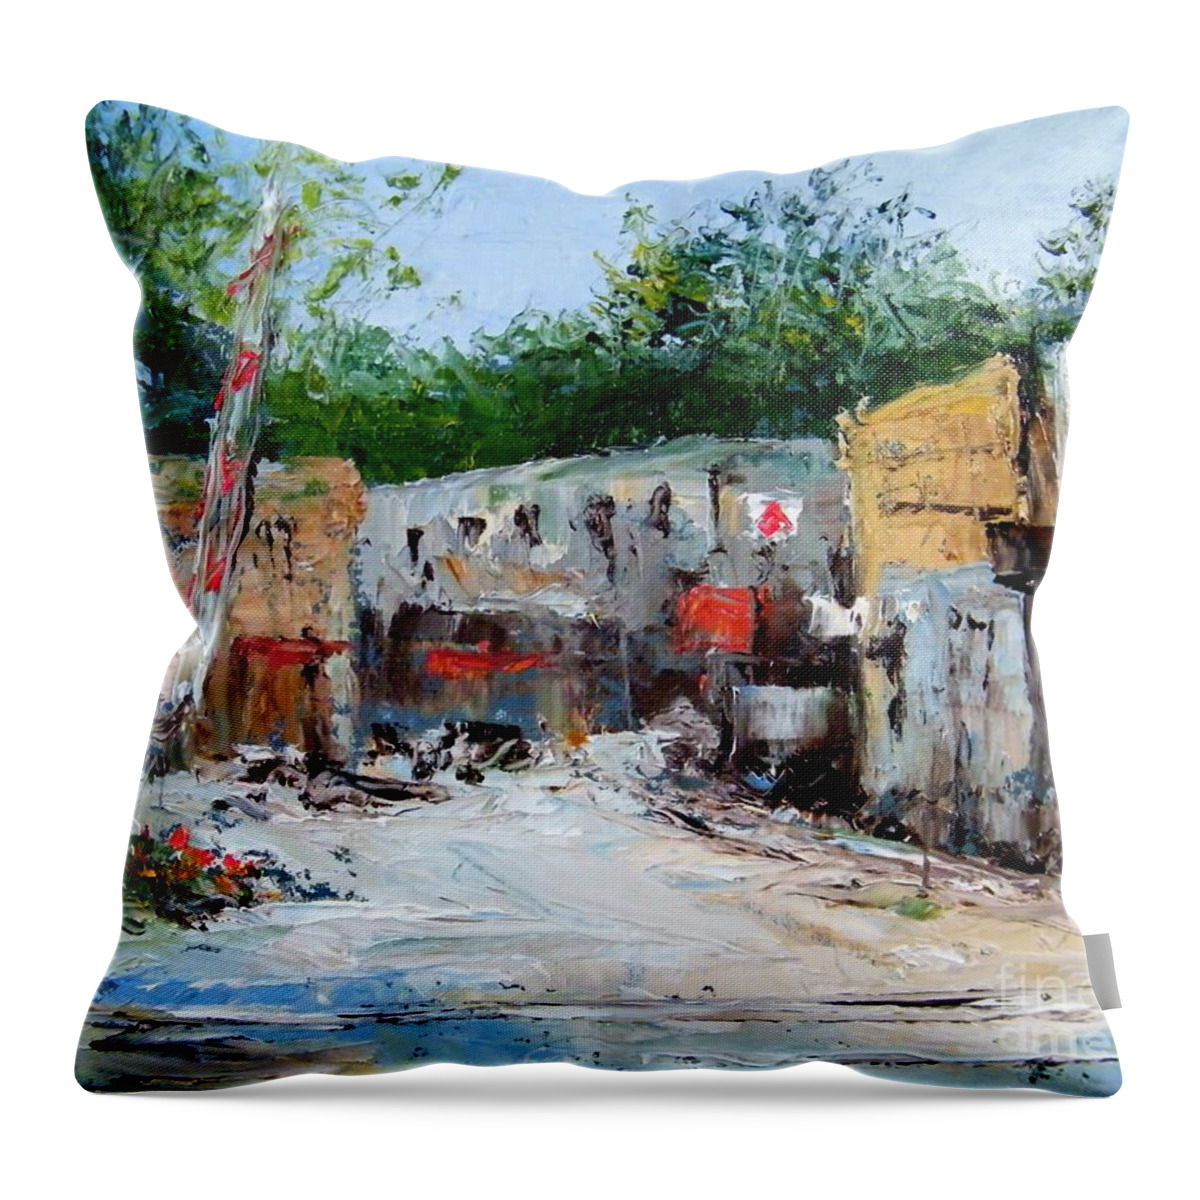 Town Throw Pillow featuring the painting Railroad Crossing by Virginia Potter